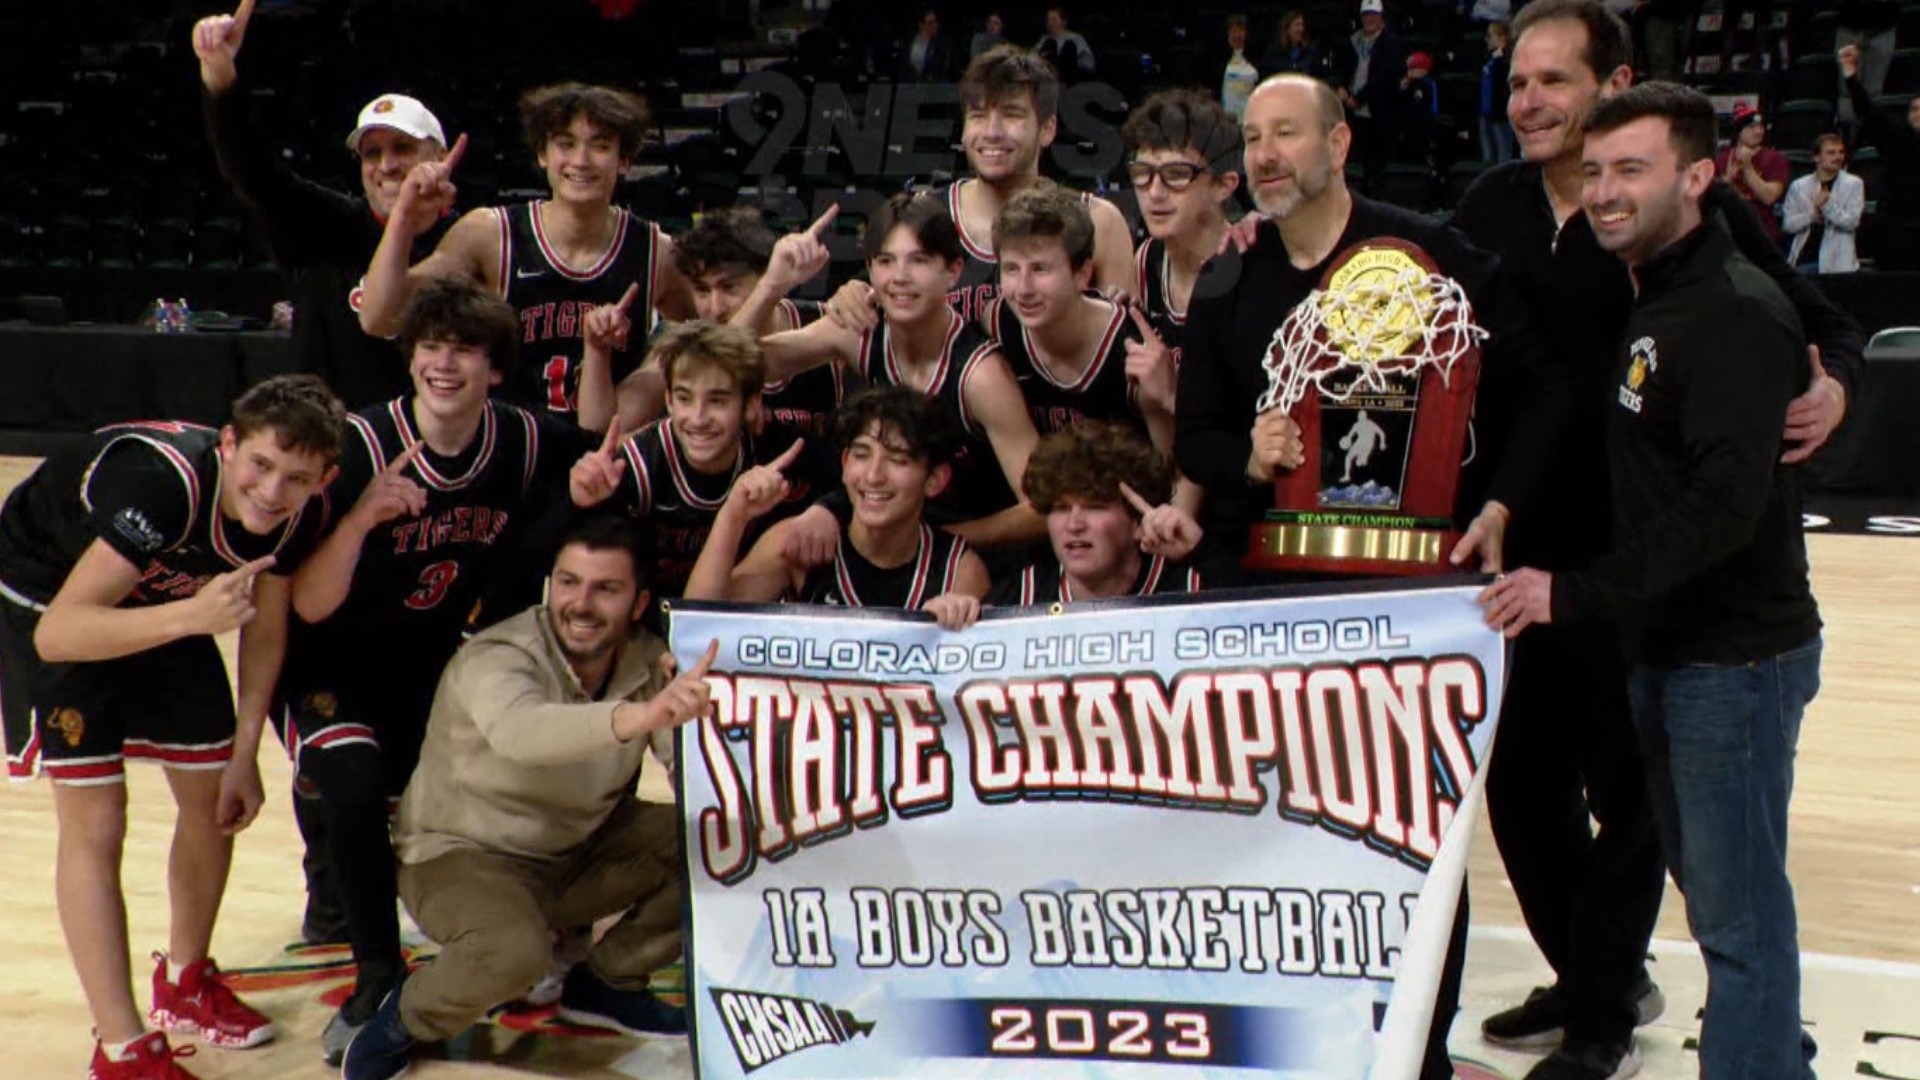 The Tigers defeated the Belleview Christian Bruins 55-42 in the Class 1A championship game.